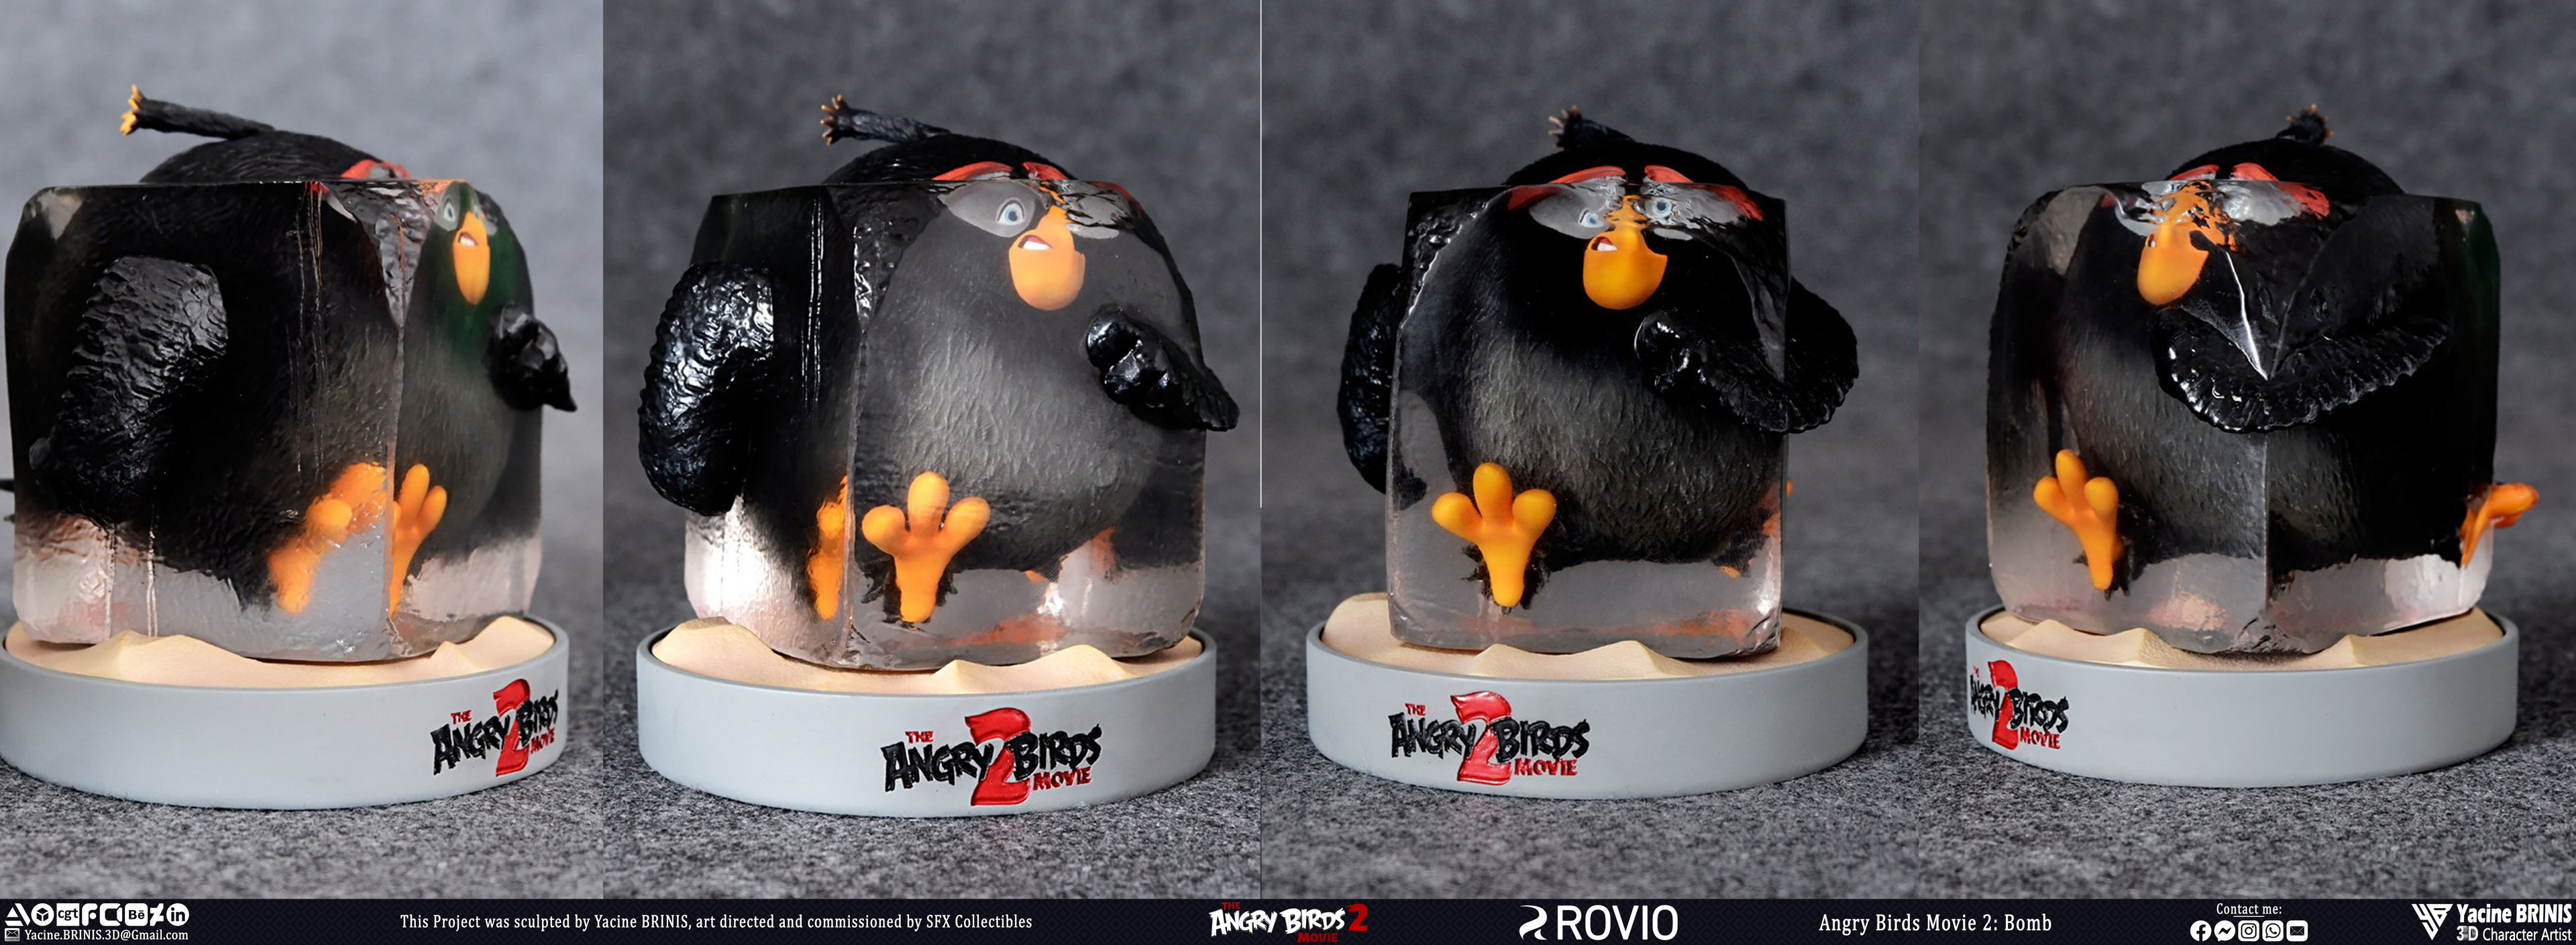 Angry Birds Movie 2 Rovio Entertainment Sculpted by Yacine BRINIS 012 Bomb Printed by SFX Collectibles